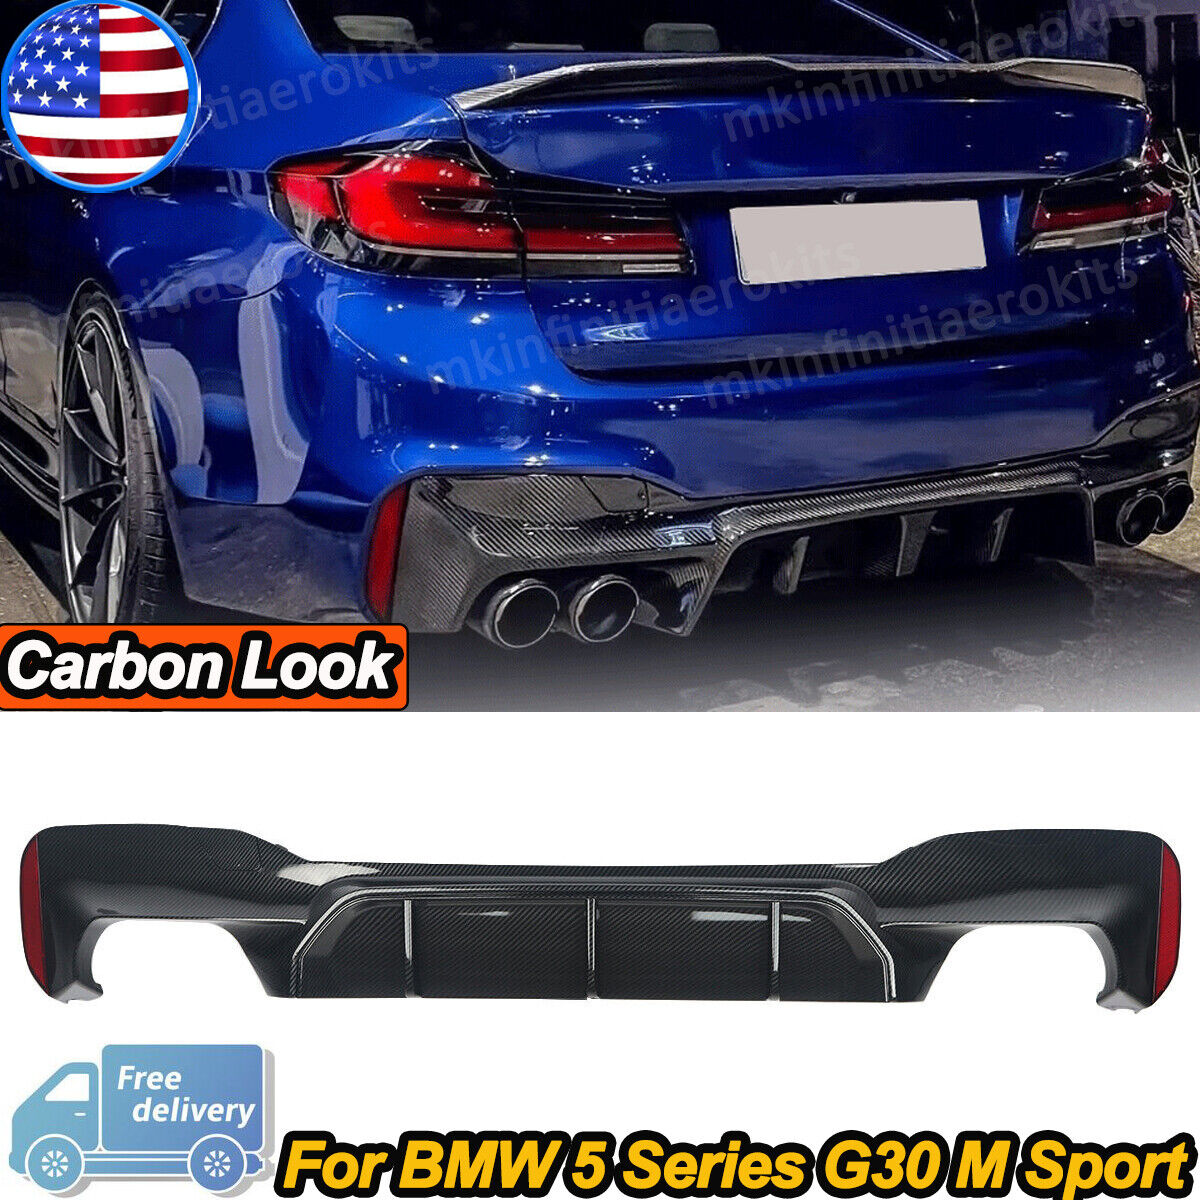 For 17-23 BMW G30 5 Series W/ M Sport Bumper M5 Style Rear Diffuser Carbon Look